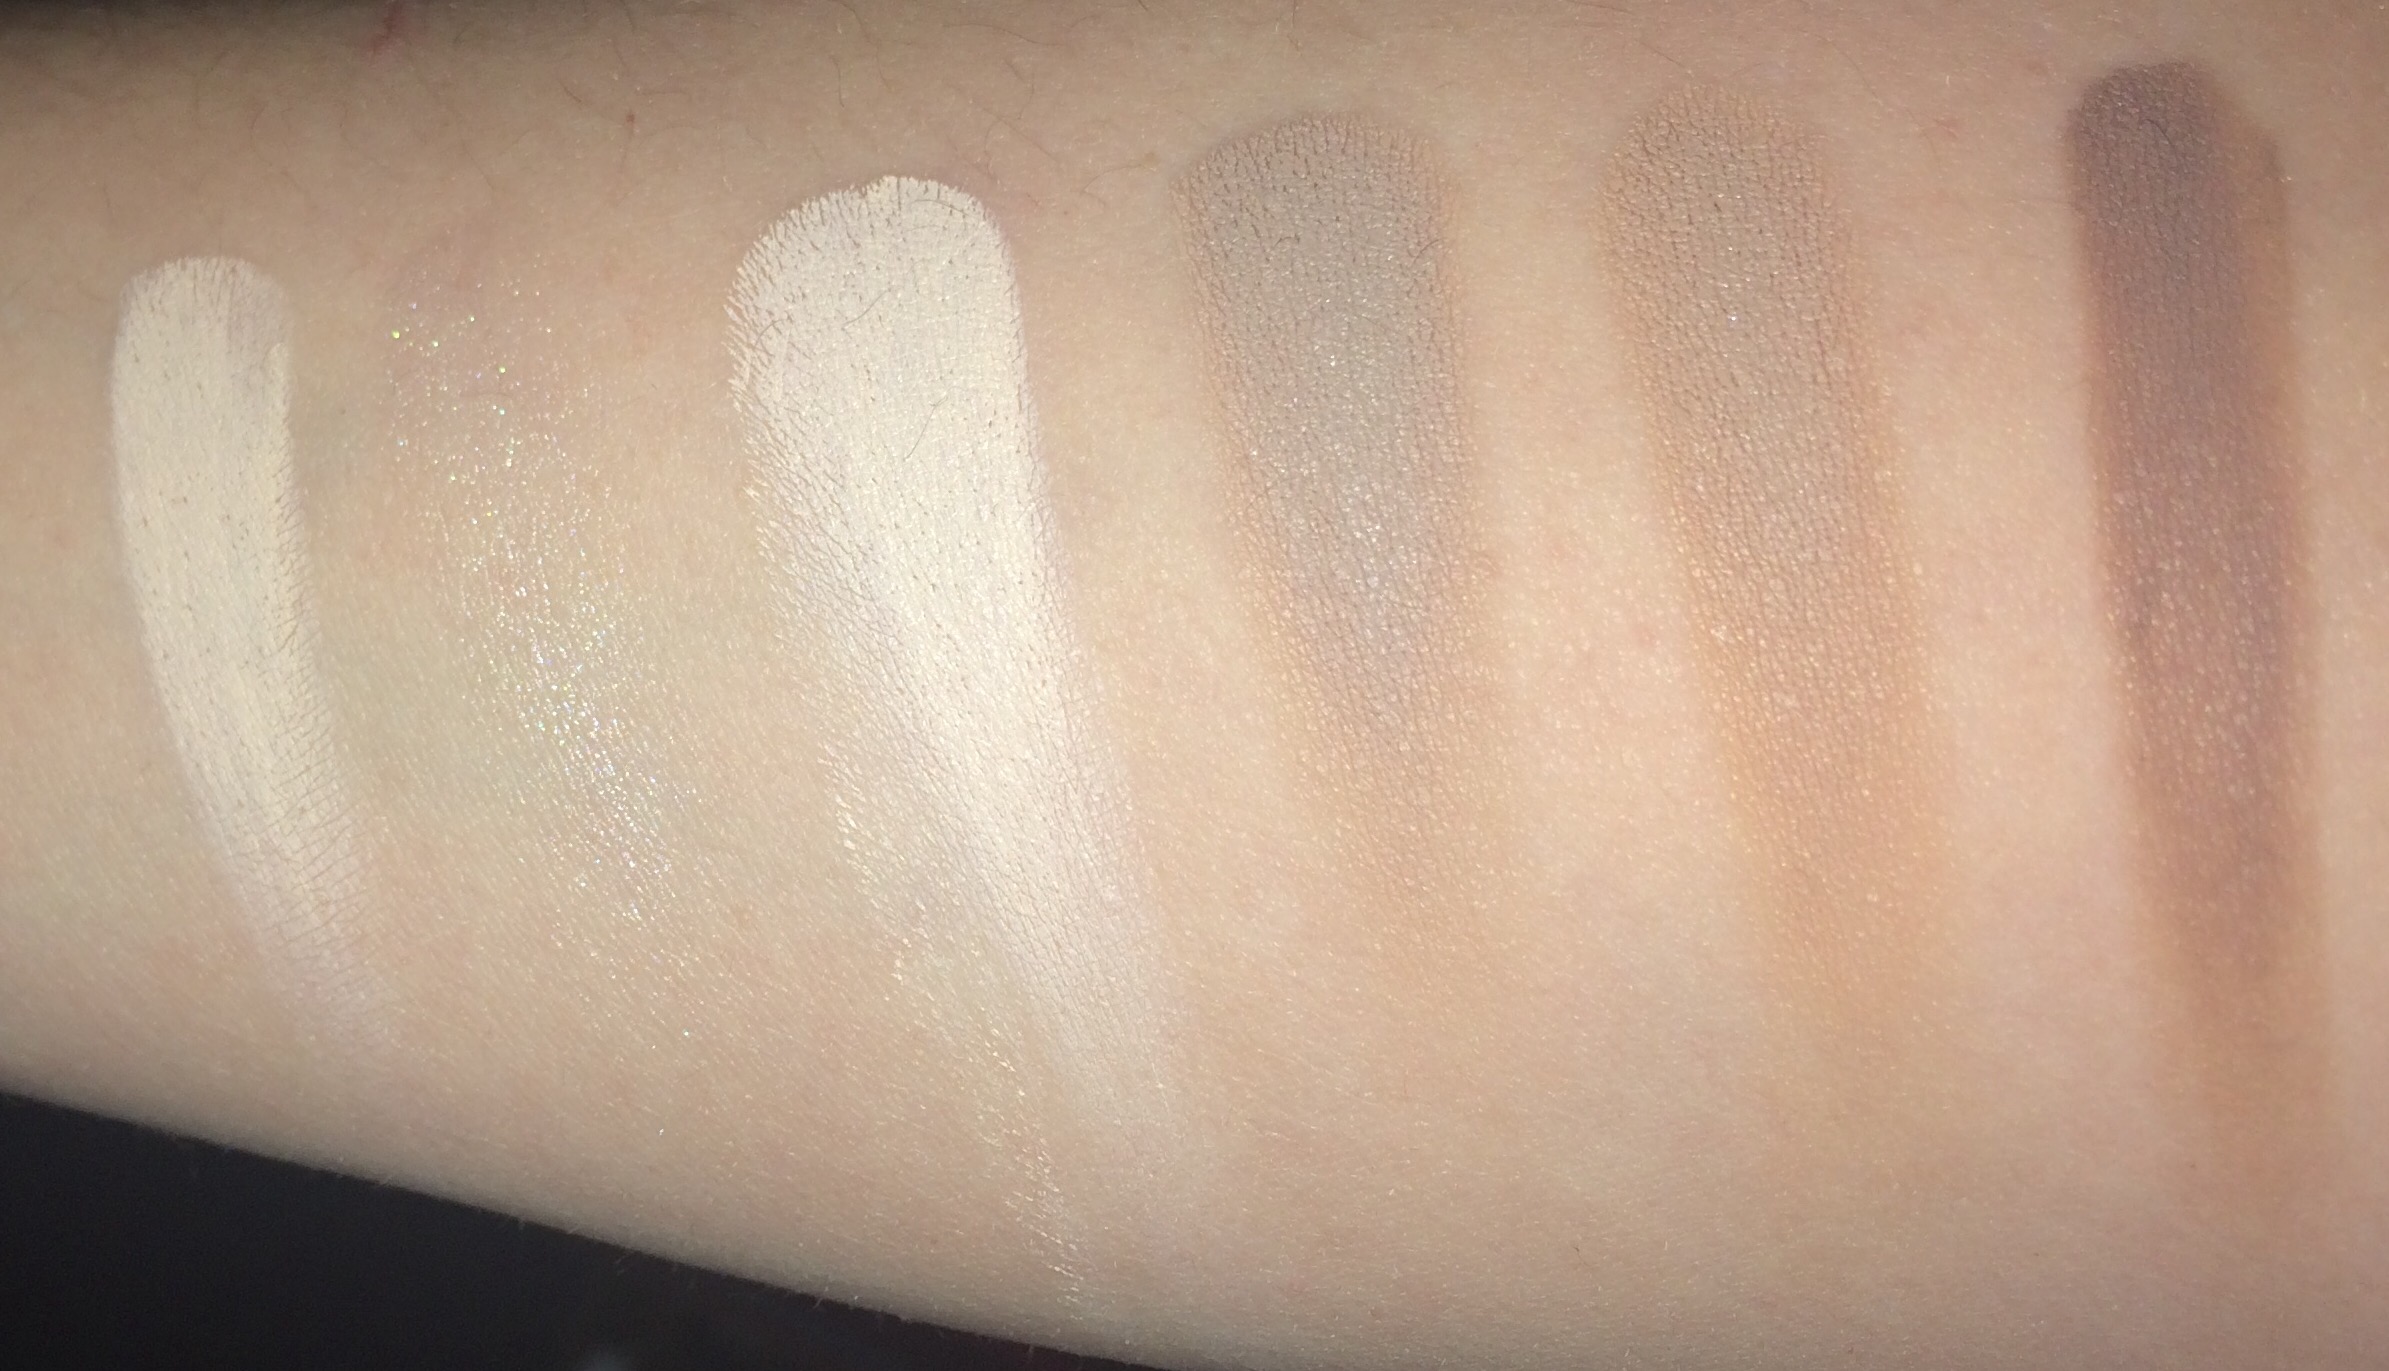 Affordable CREAM | Gorgeous CONTOUR ANASTASIA REVIEW – KIT HILLS BEVERLY